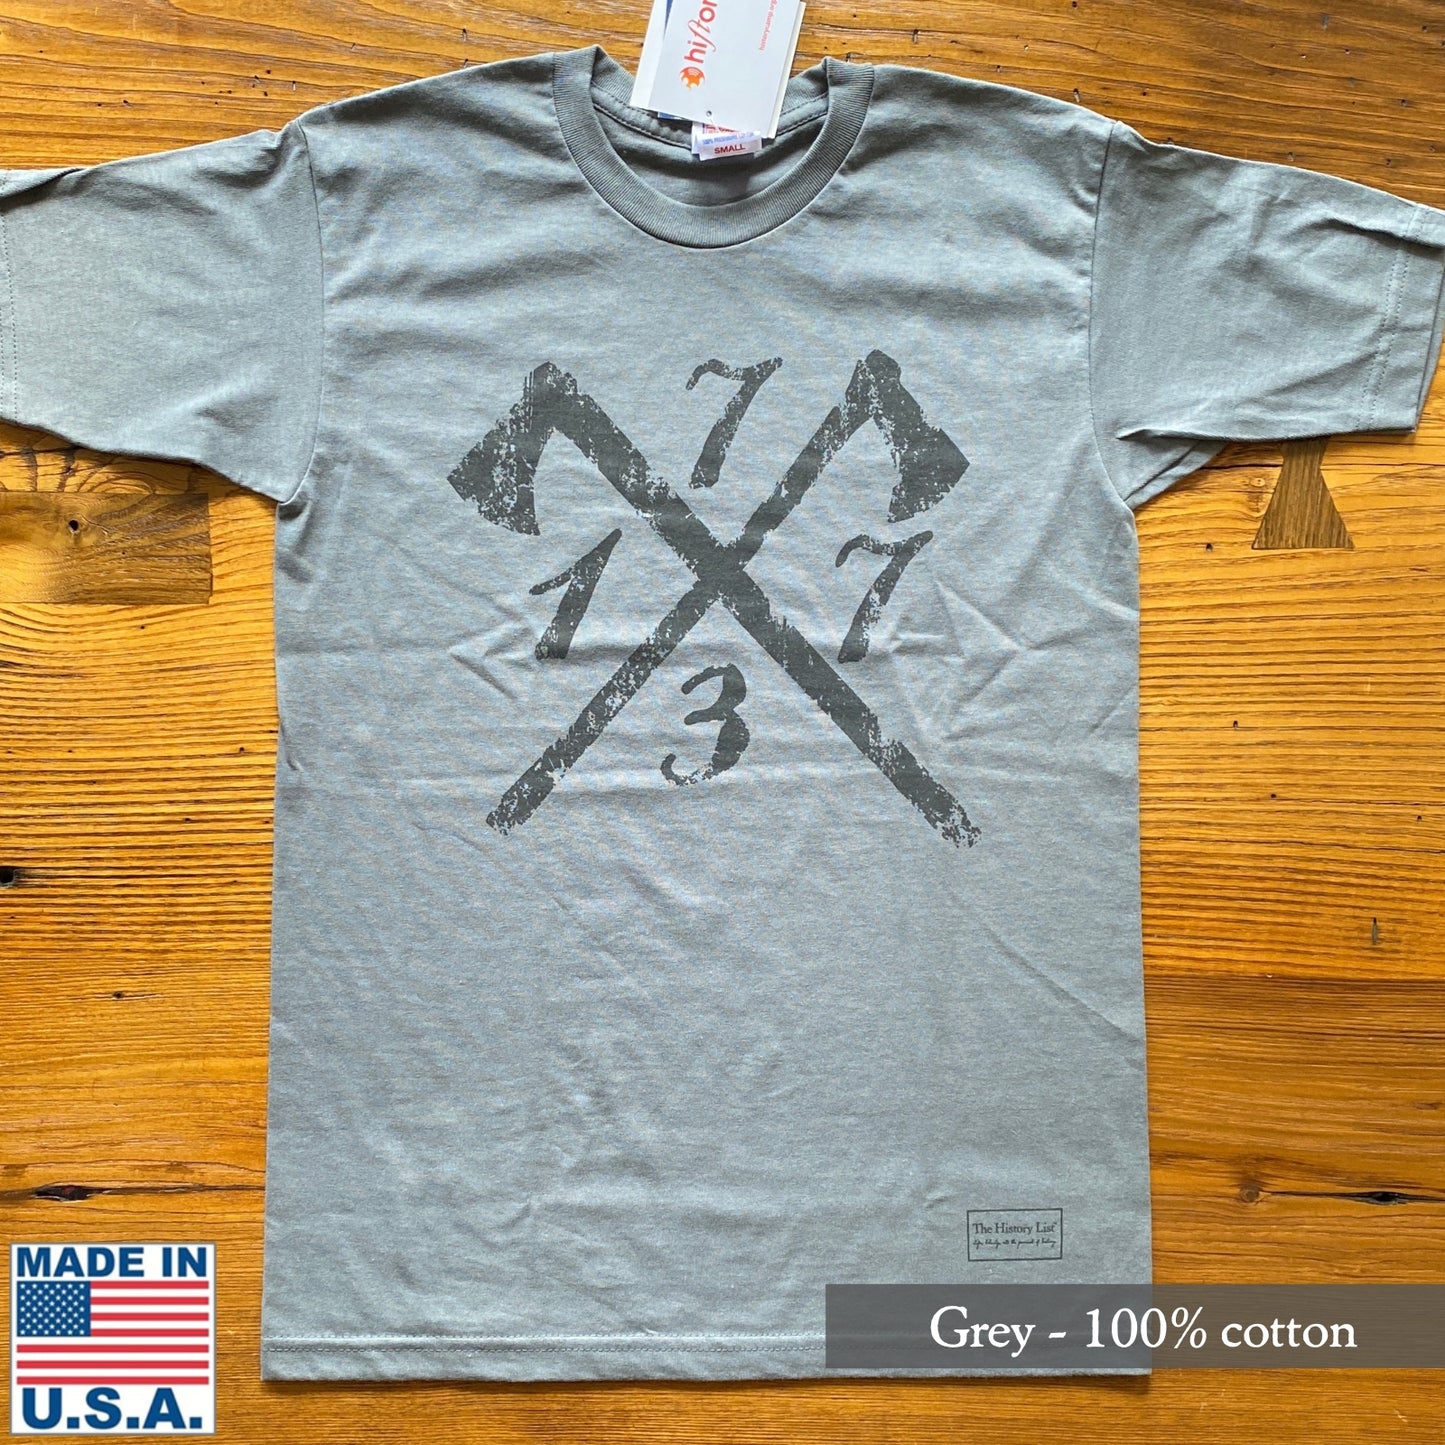 Grey of "1773" Boston Tea Party shirt - For hardcore history folks from The History List store